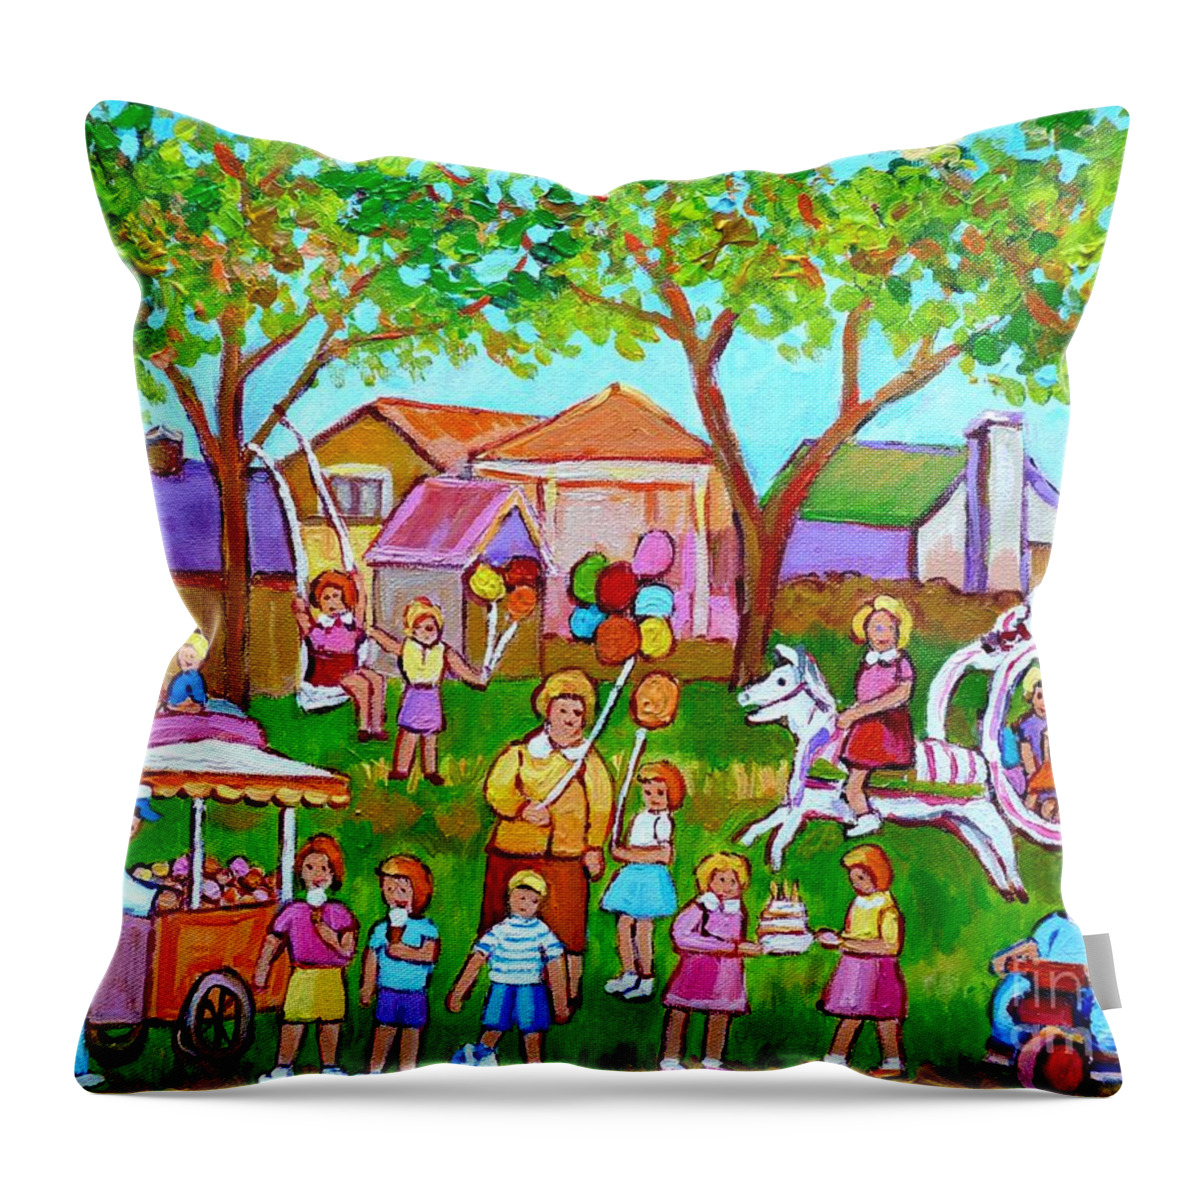 Montreal Throw Pillow featuring the painting A Child's Birthday Party Backyard Fun Canadian Paintings Carole Spandau by Carole Spandau